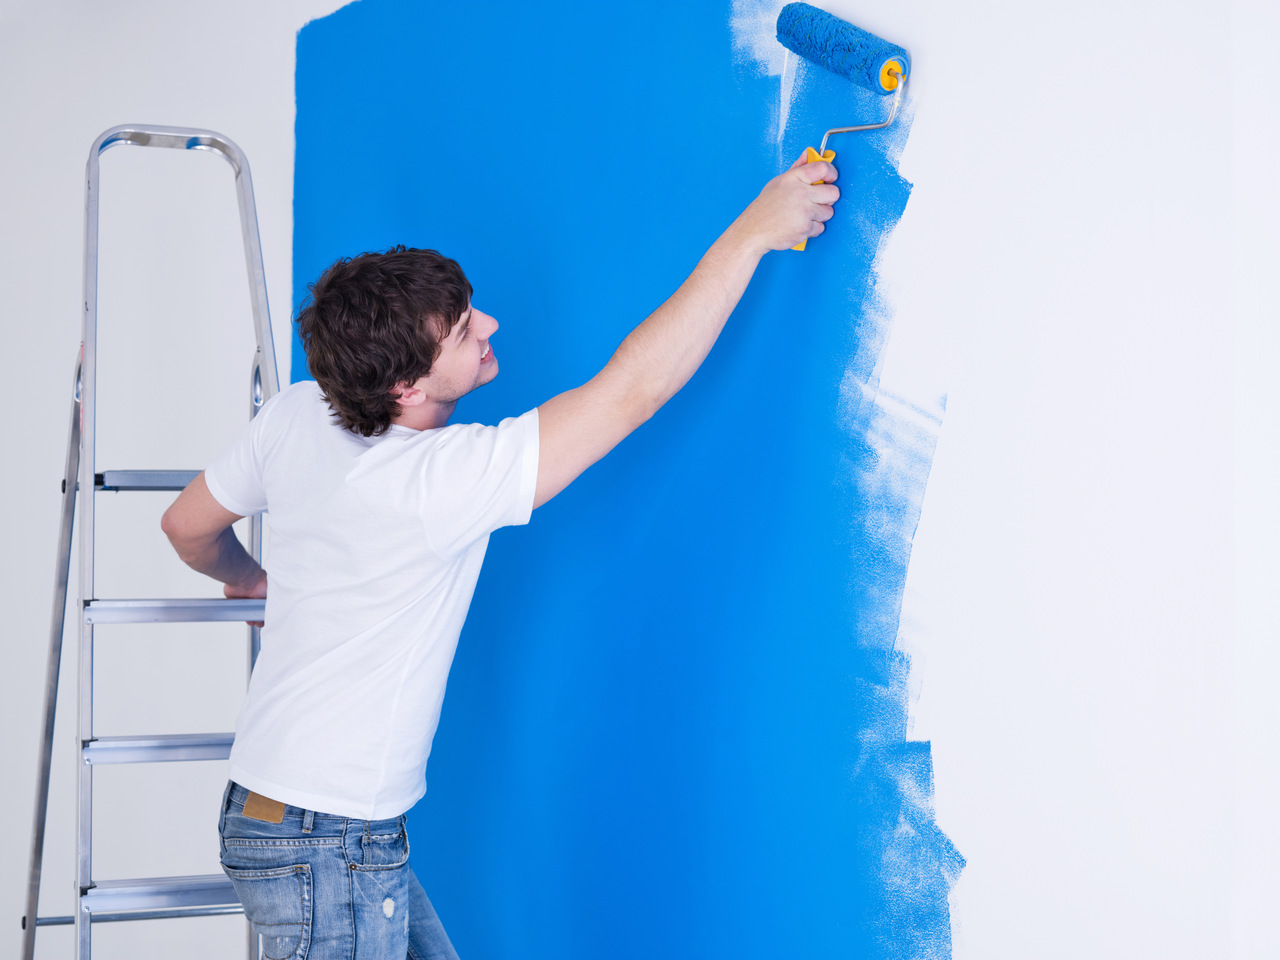 Washable paints. We check the types of paint